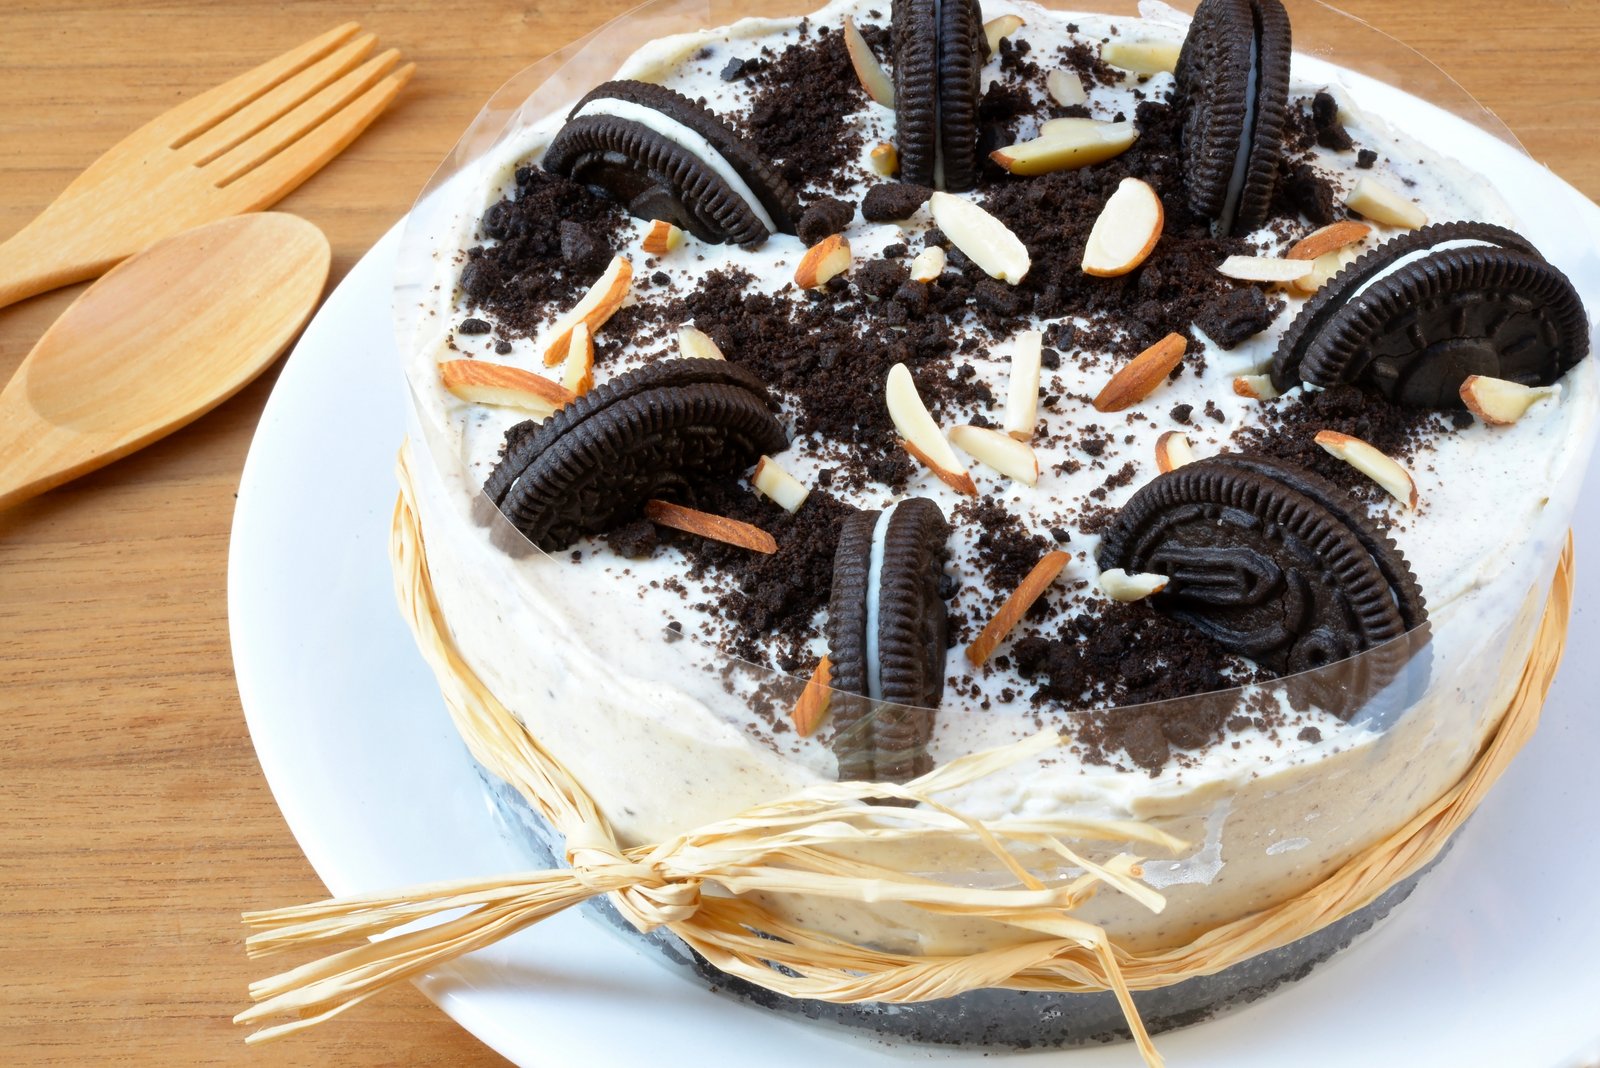 Oreo Cake Recipe With Buttercream Frosting (Eggless)